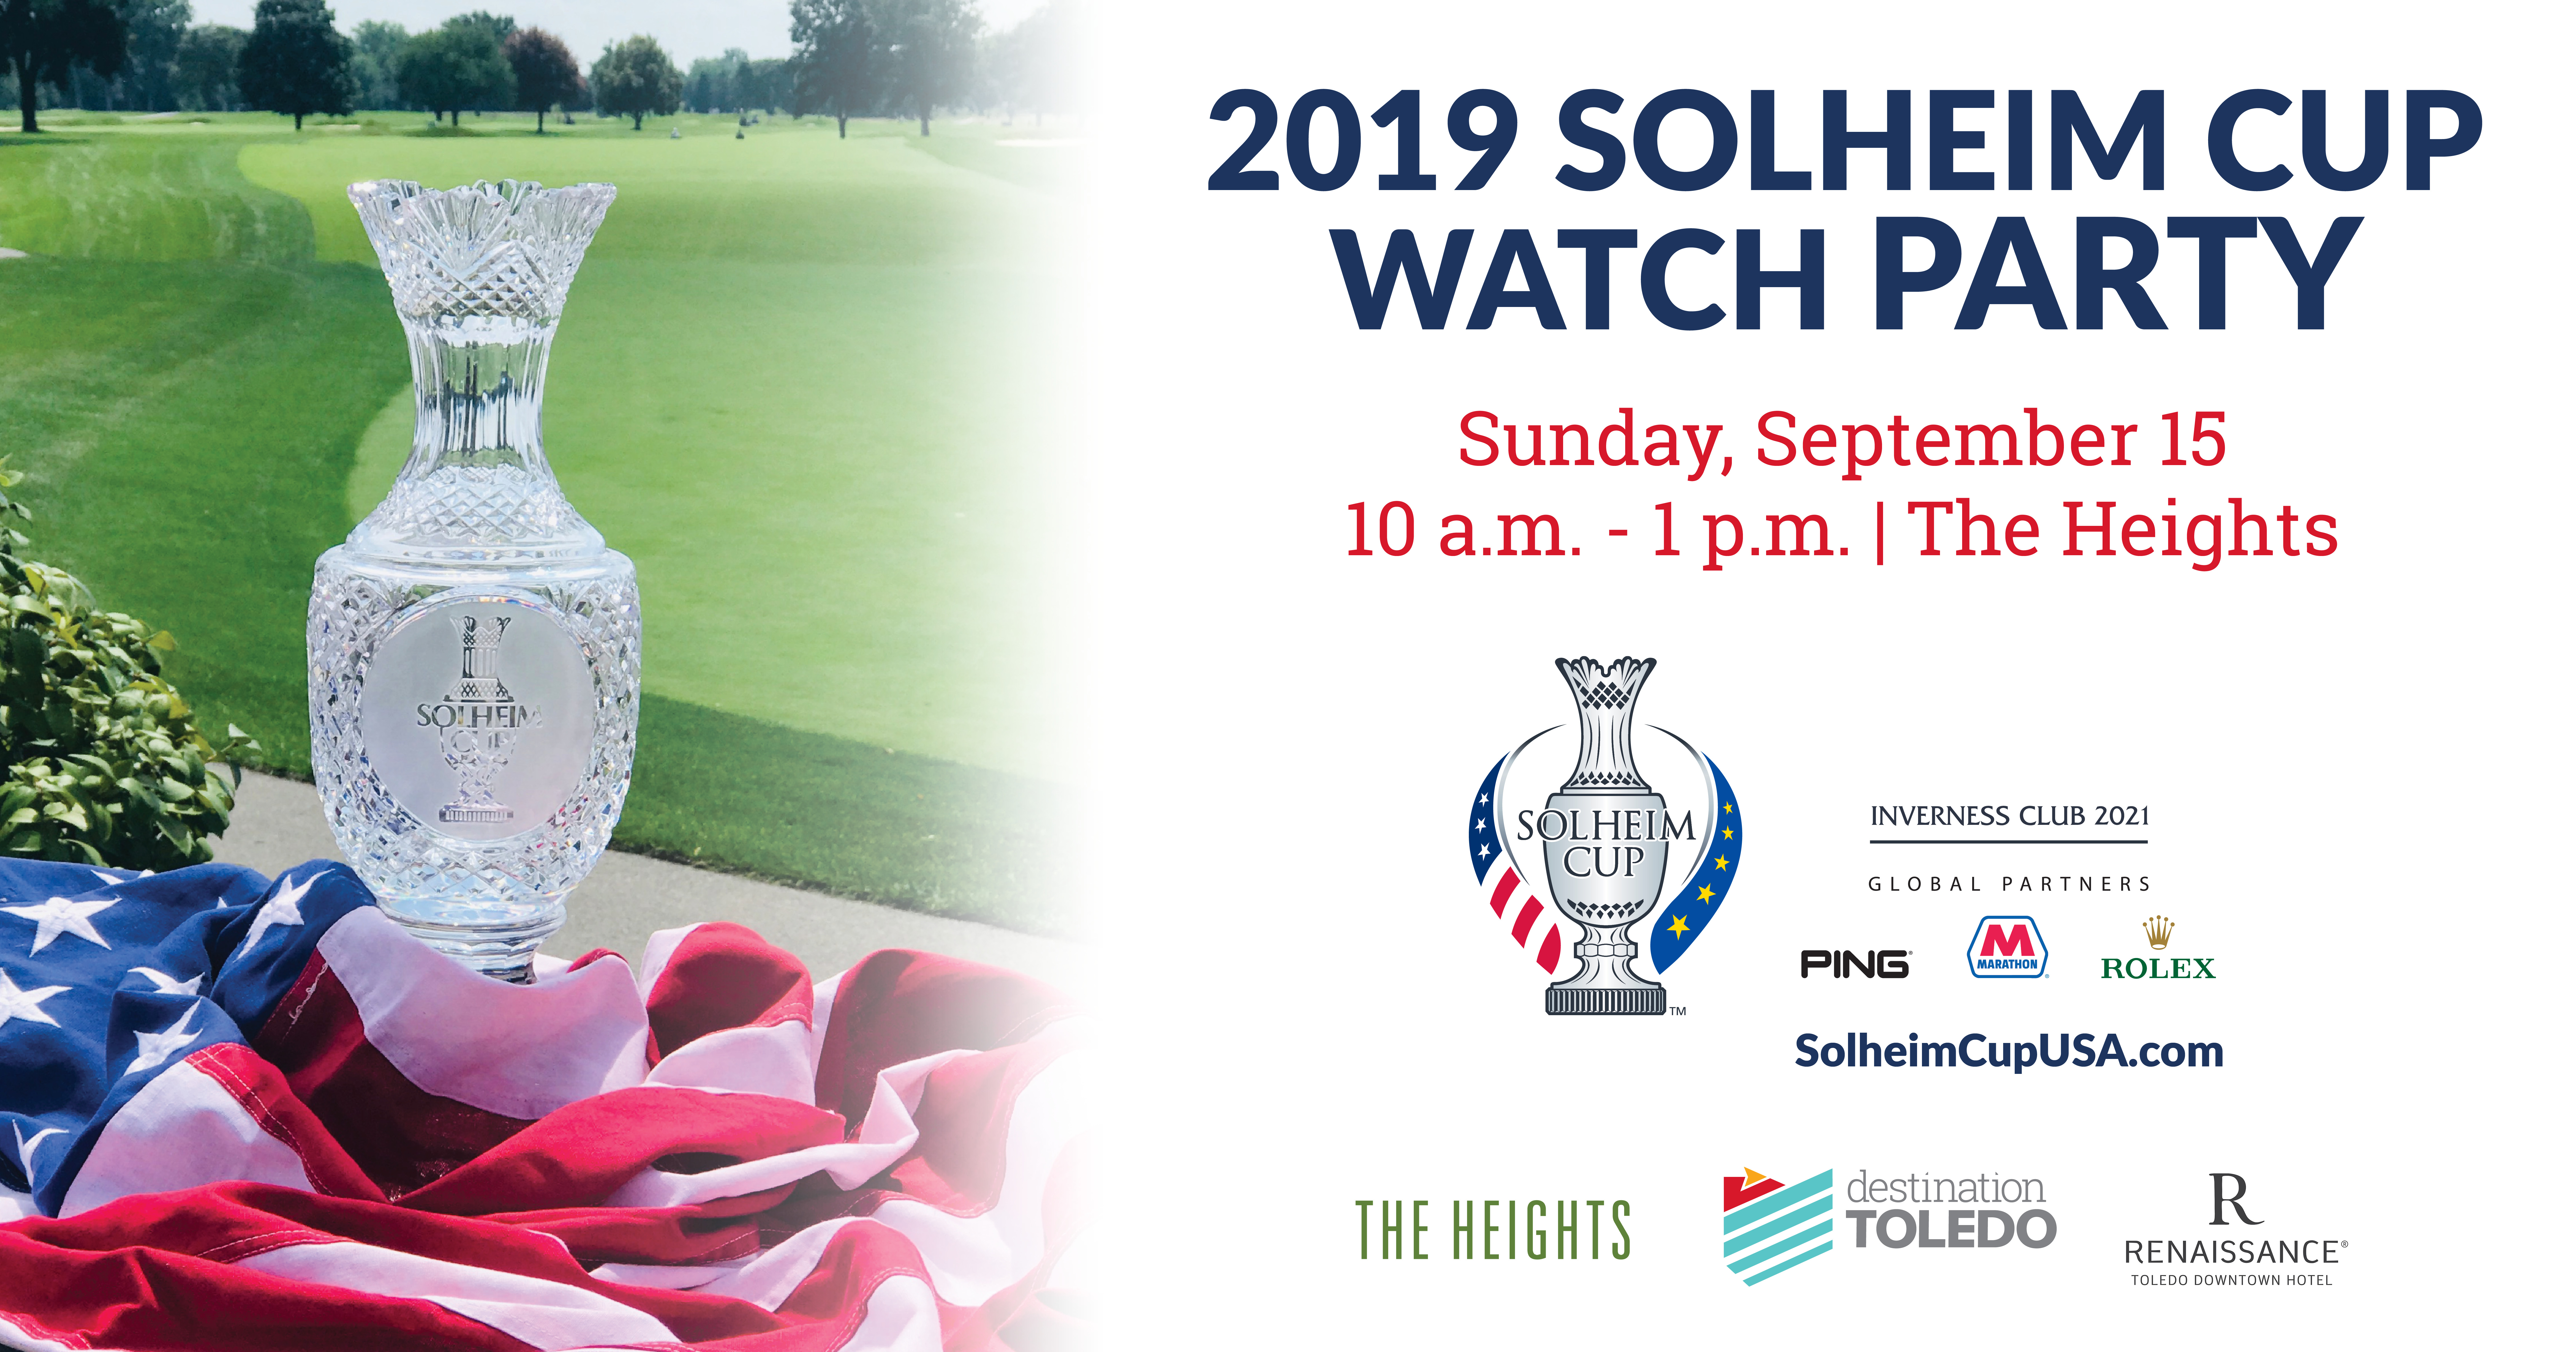 2019 Solheim Cup Watch Party